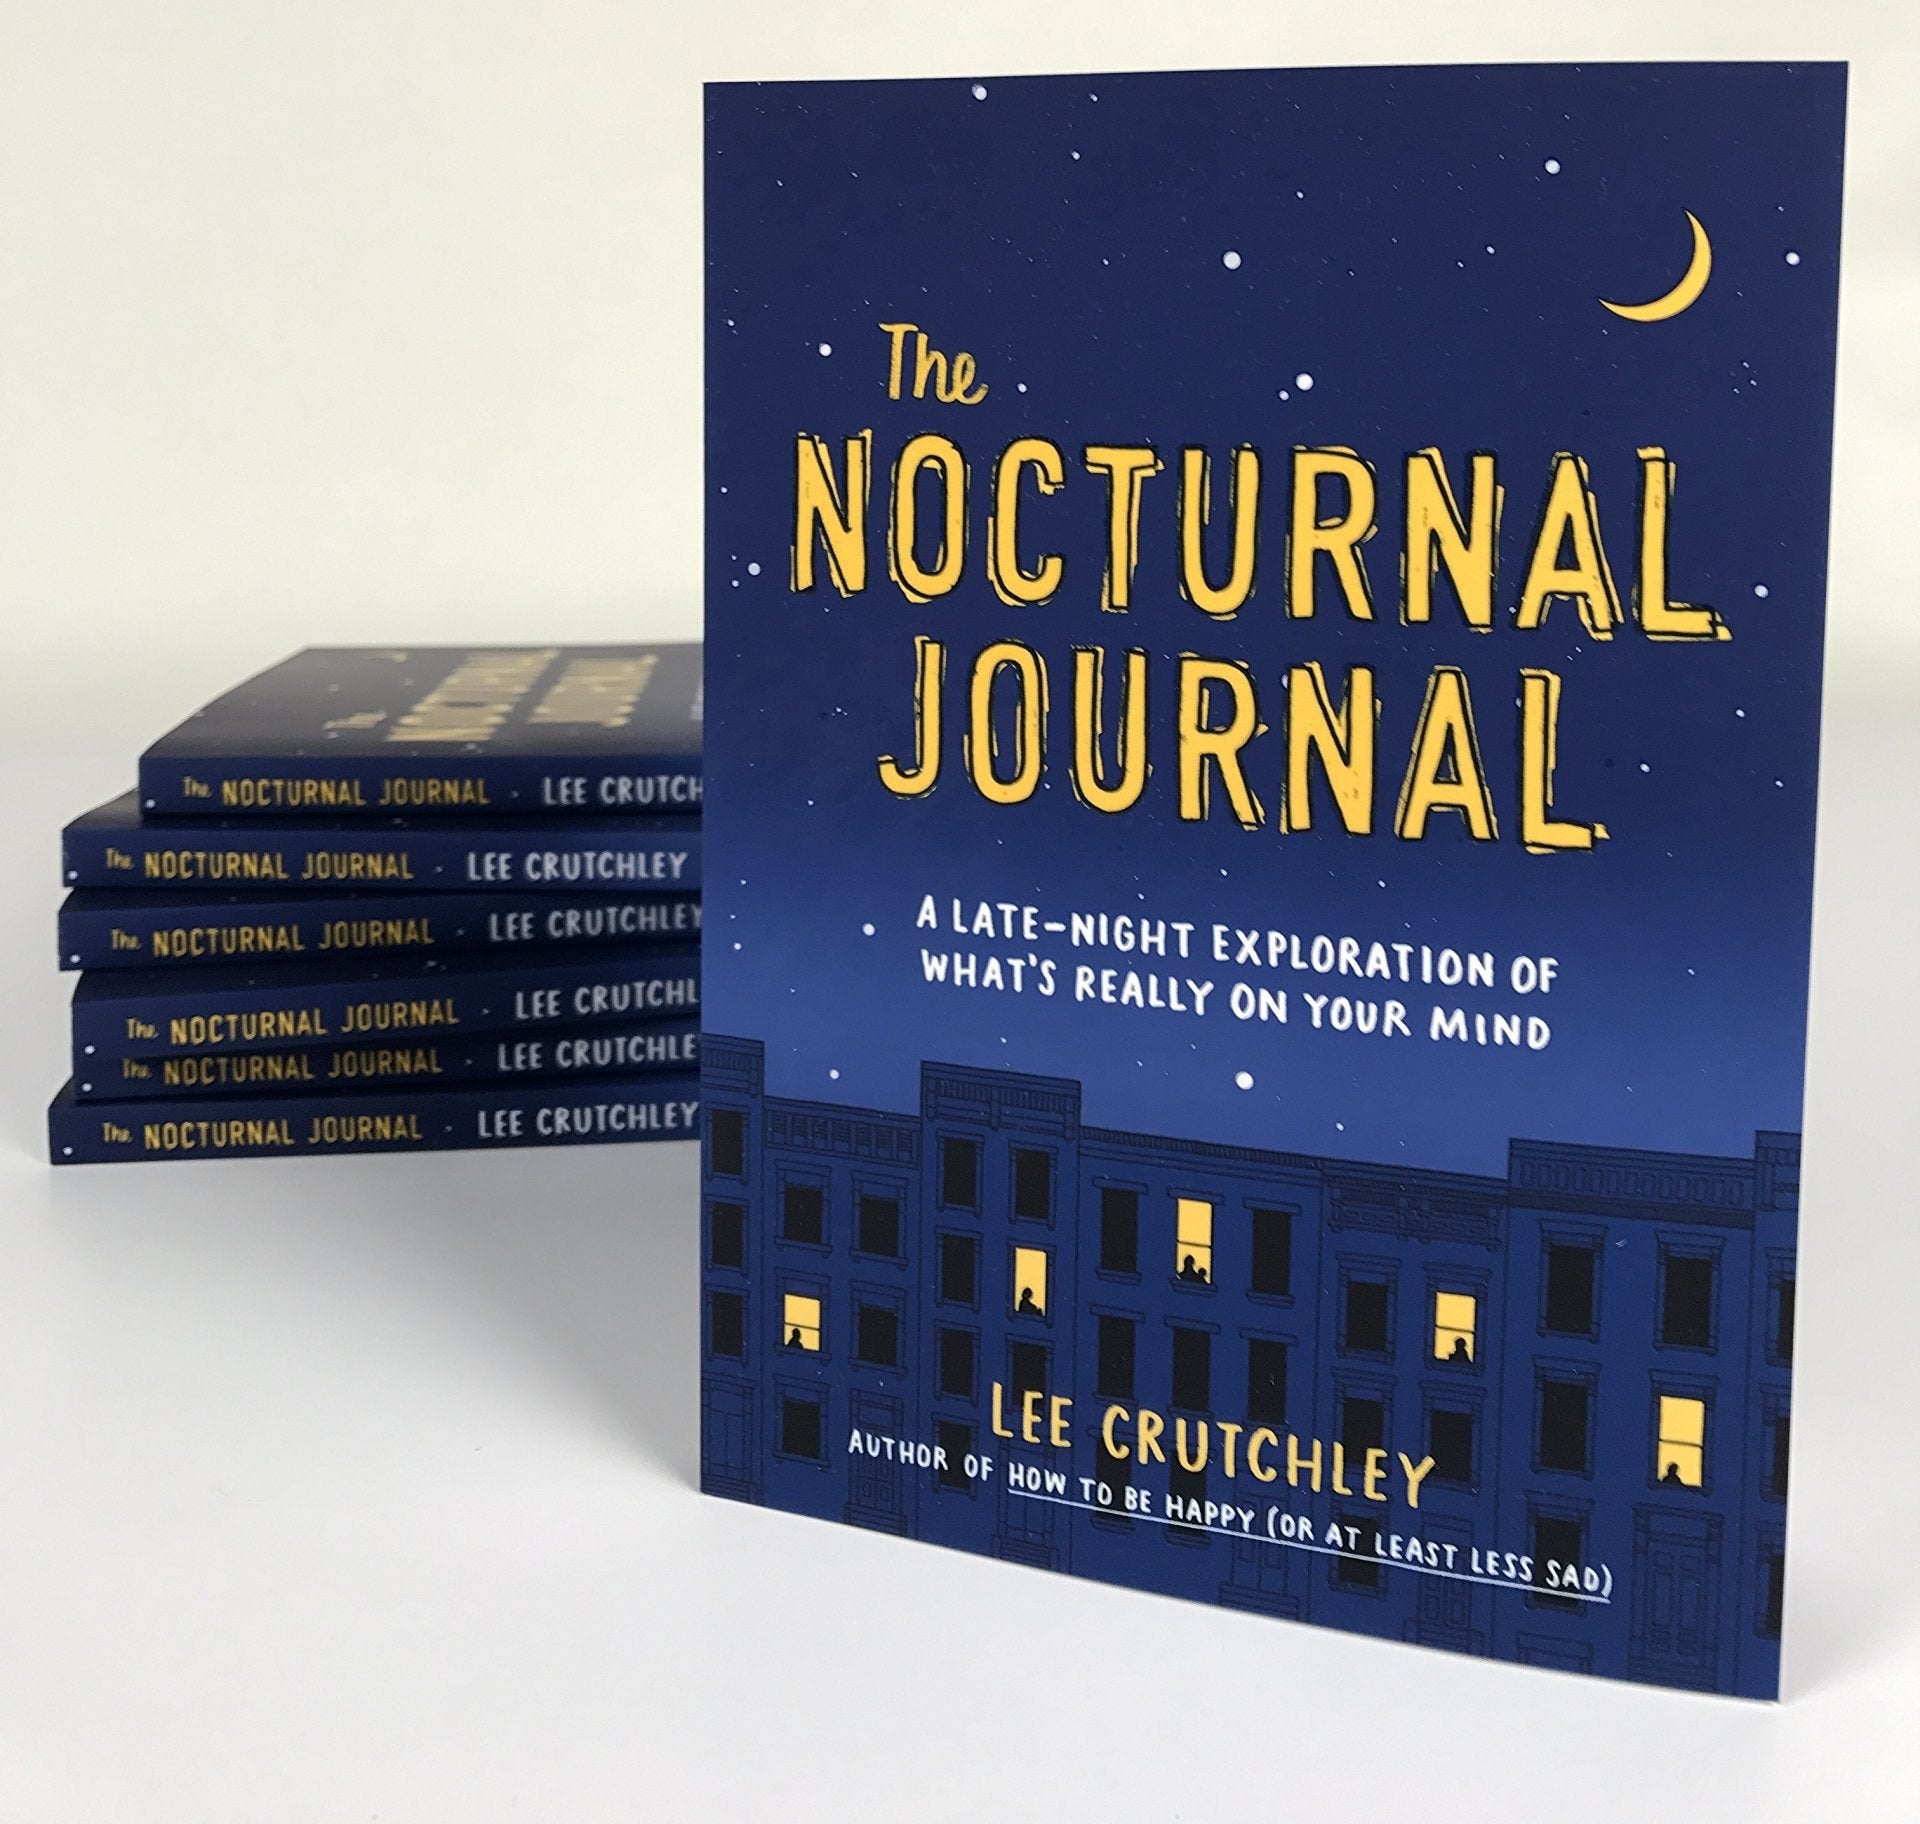 A book called the Nocturnal Journal by Lee Crutchley